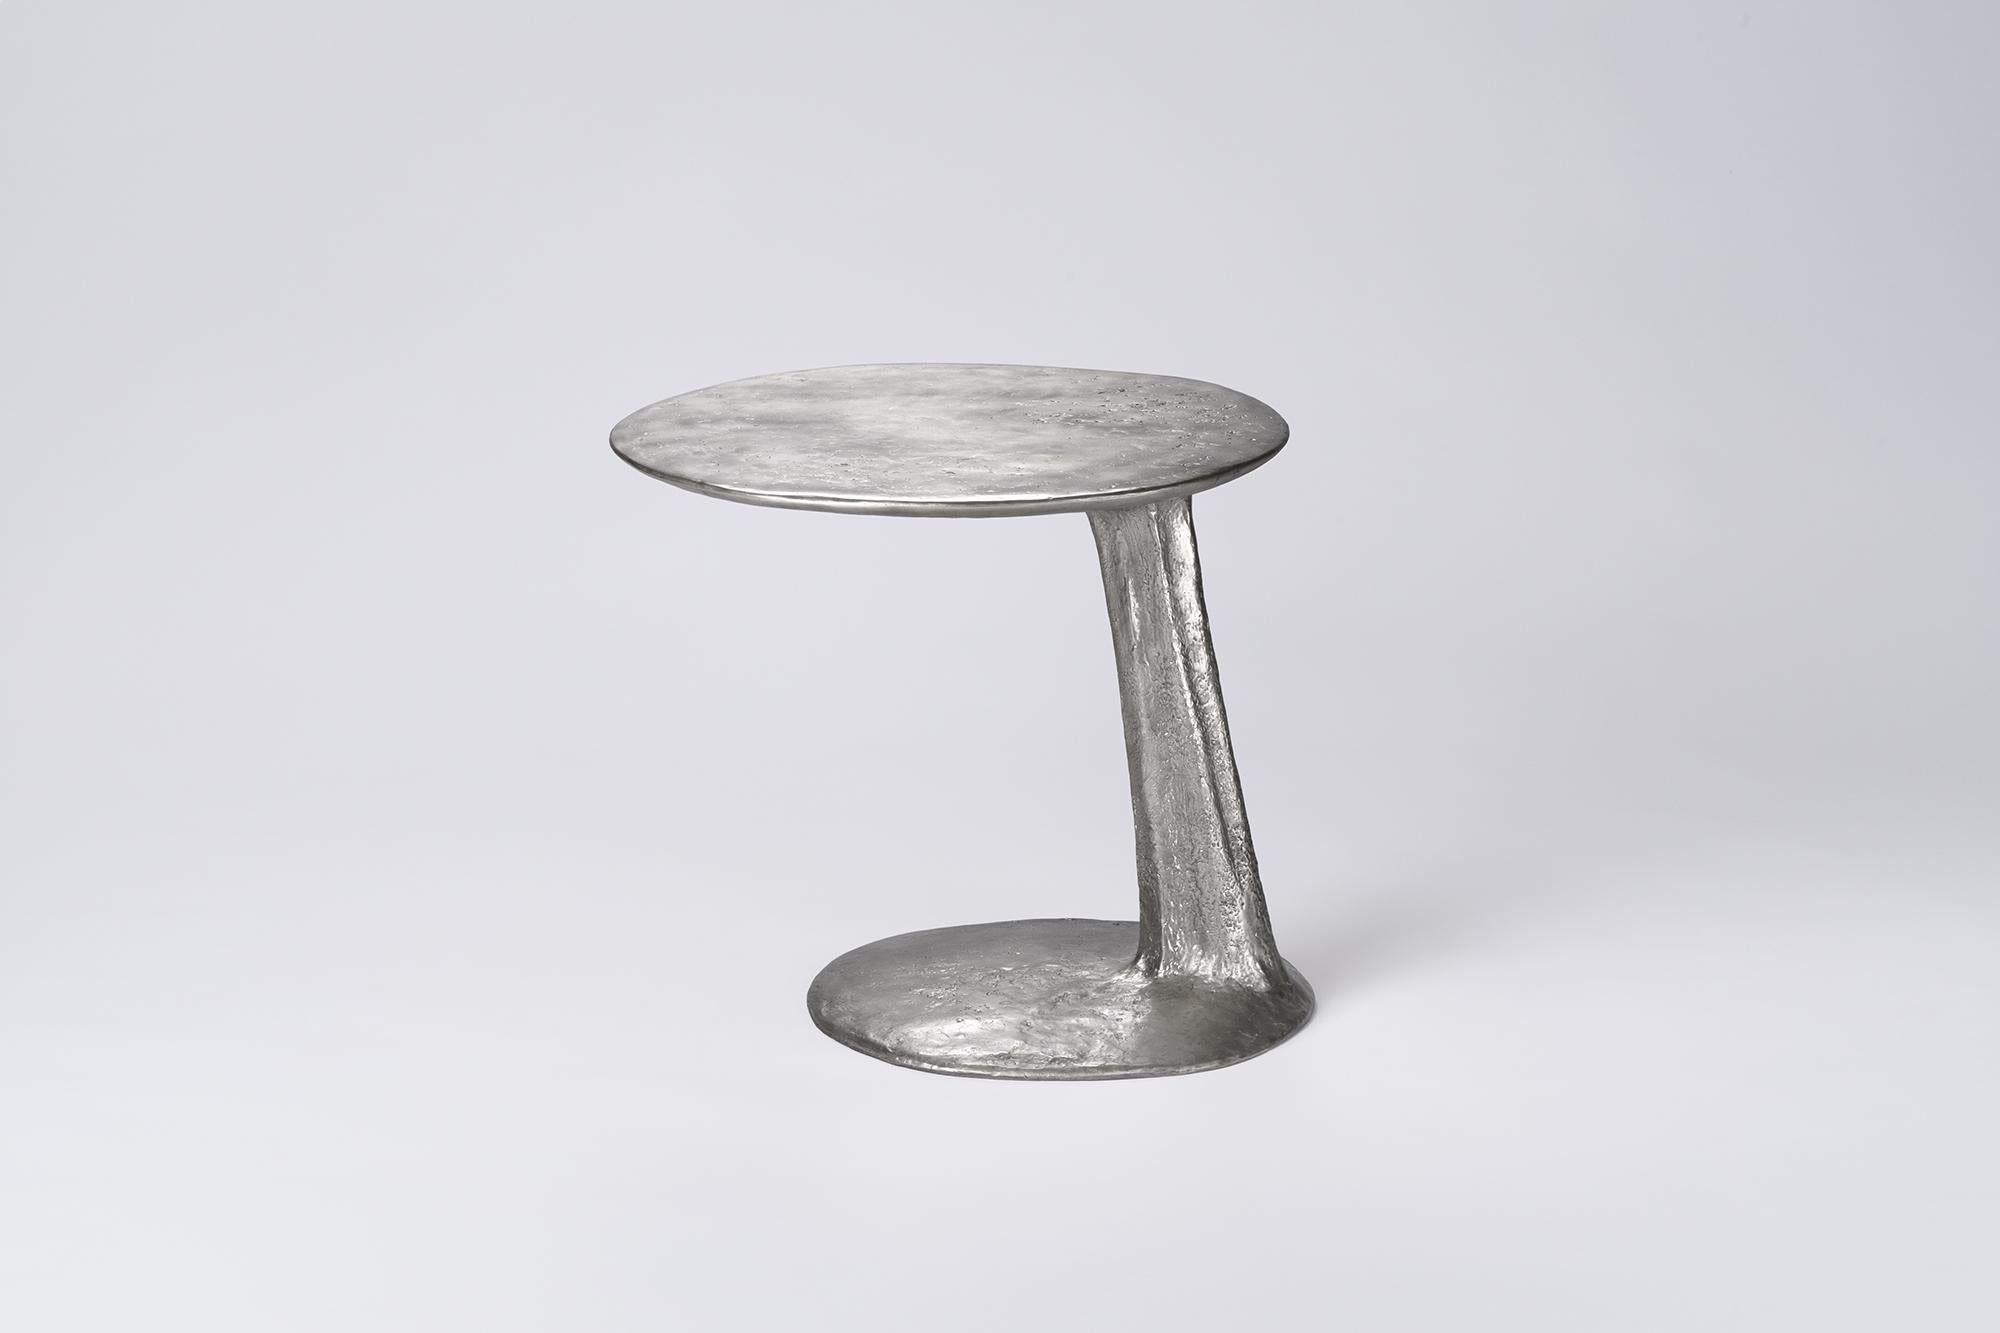 Silver Cast Brass Lava Large Side Table by Atelier V&F
Dimensions: D 52 x W 50 x H 46 cm. 
Materials: Cast brass with a silver finish.

Available in different finishes (cast, black and silver). Available in two different sizes. Prices may vary.